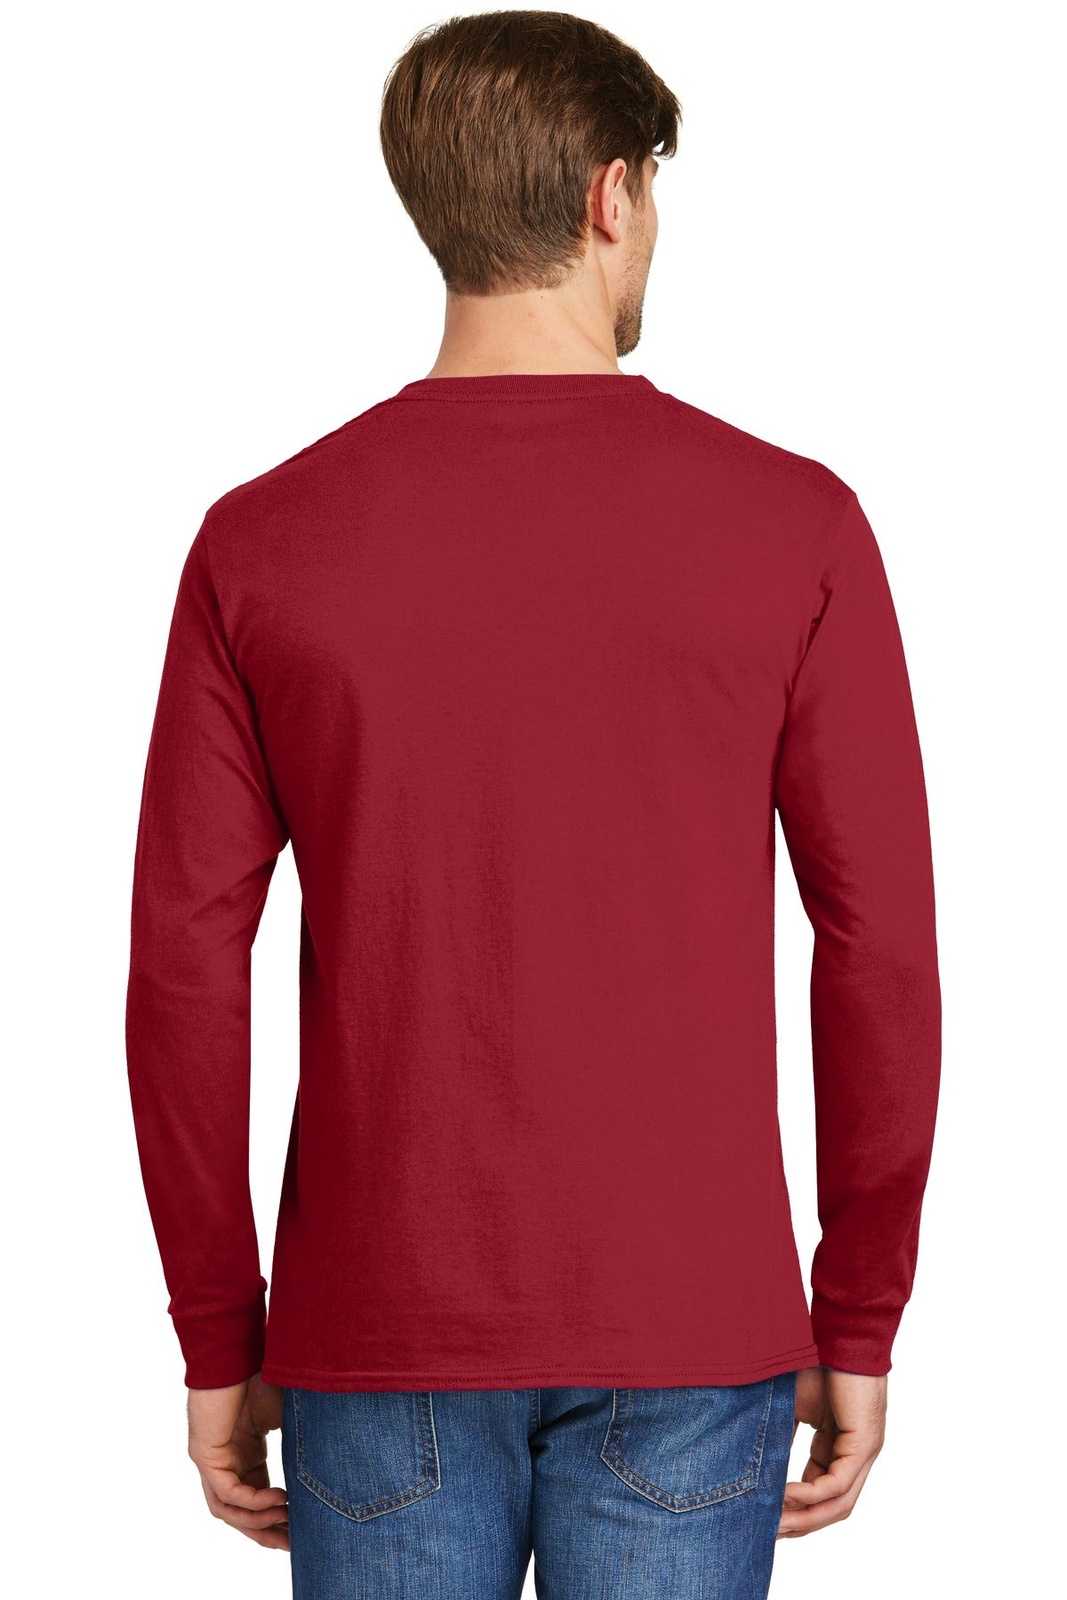 Hanes 5586 Tagless 100% Cotton Long Sleeve T-Shirt - Deep Red - HIT a Double